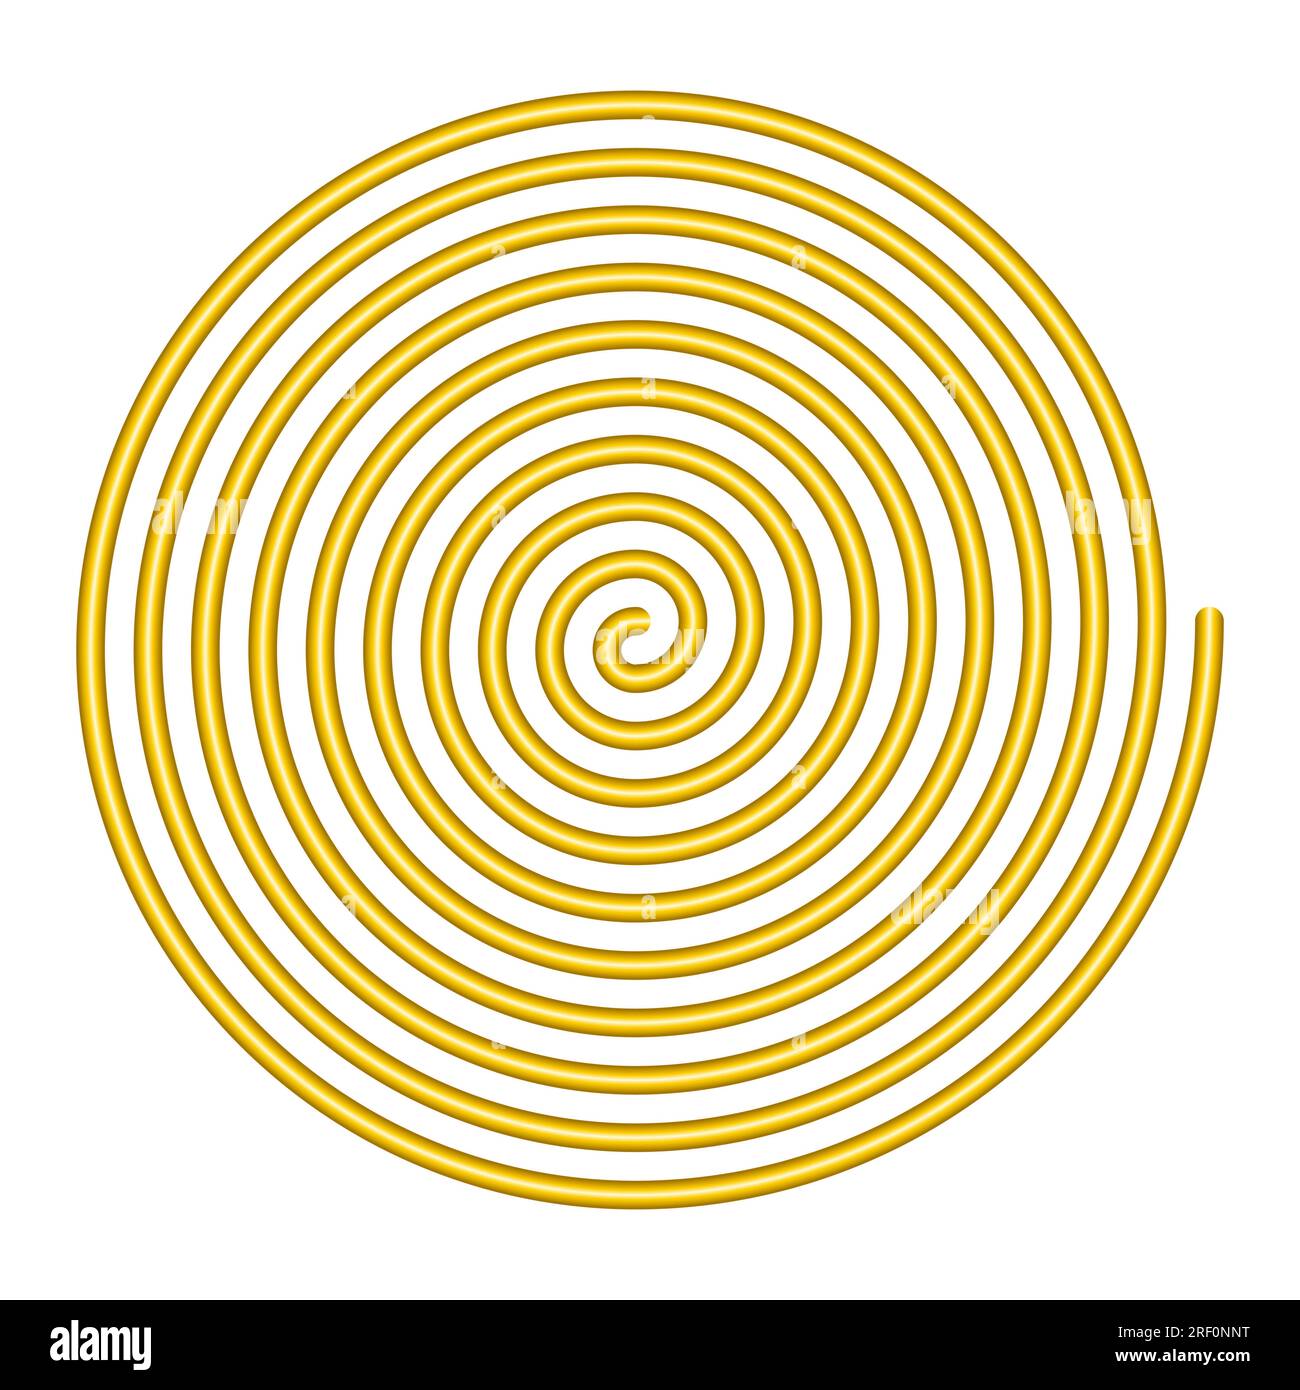 Large linear spiral. Gold colored Archimedean spiral of with ten turnings of one arm of an arithmetic spiral, rotating with constant angular velocity. Stock Photo